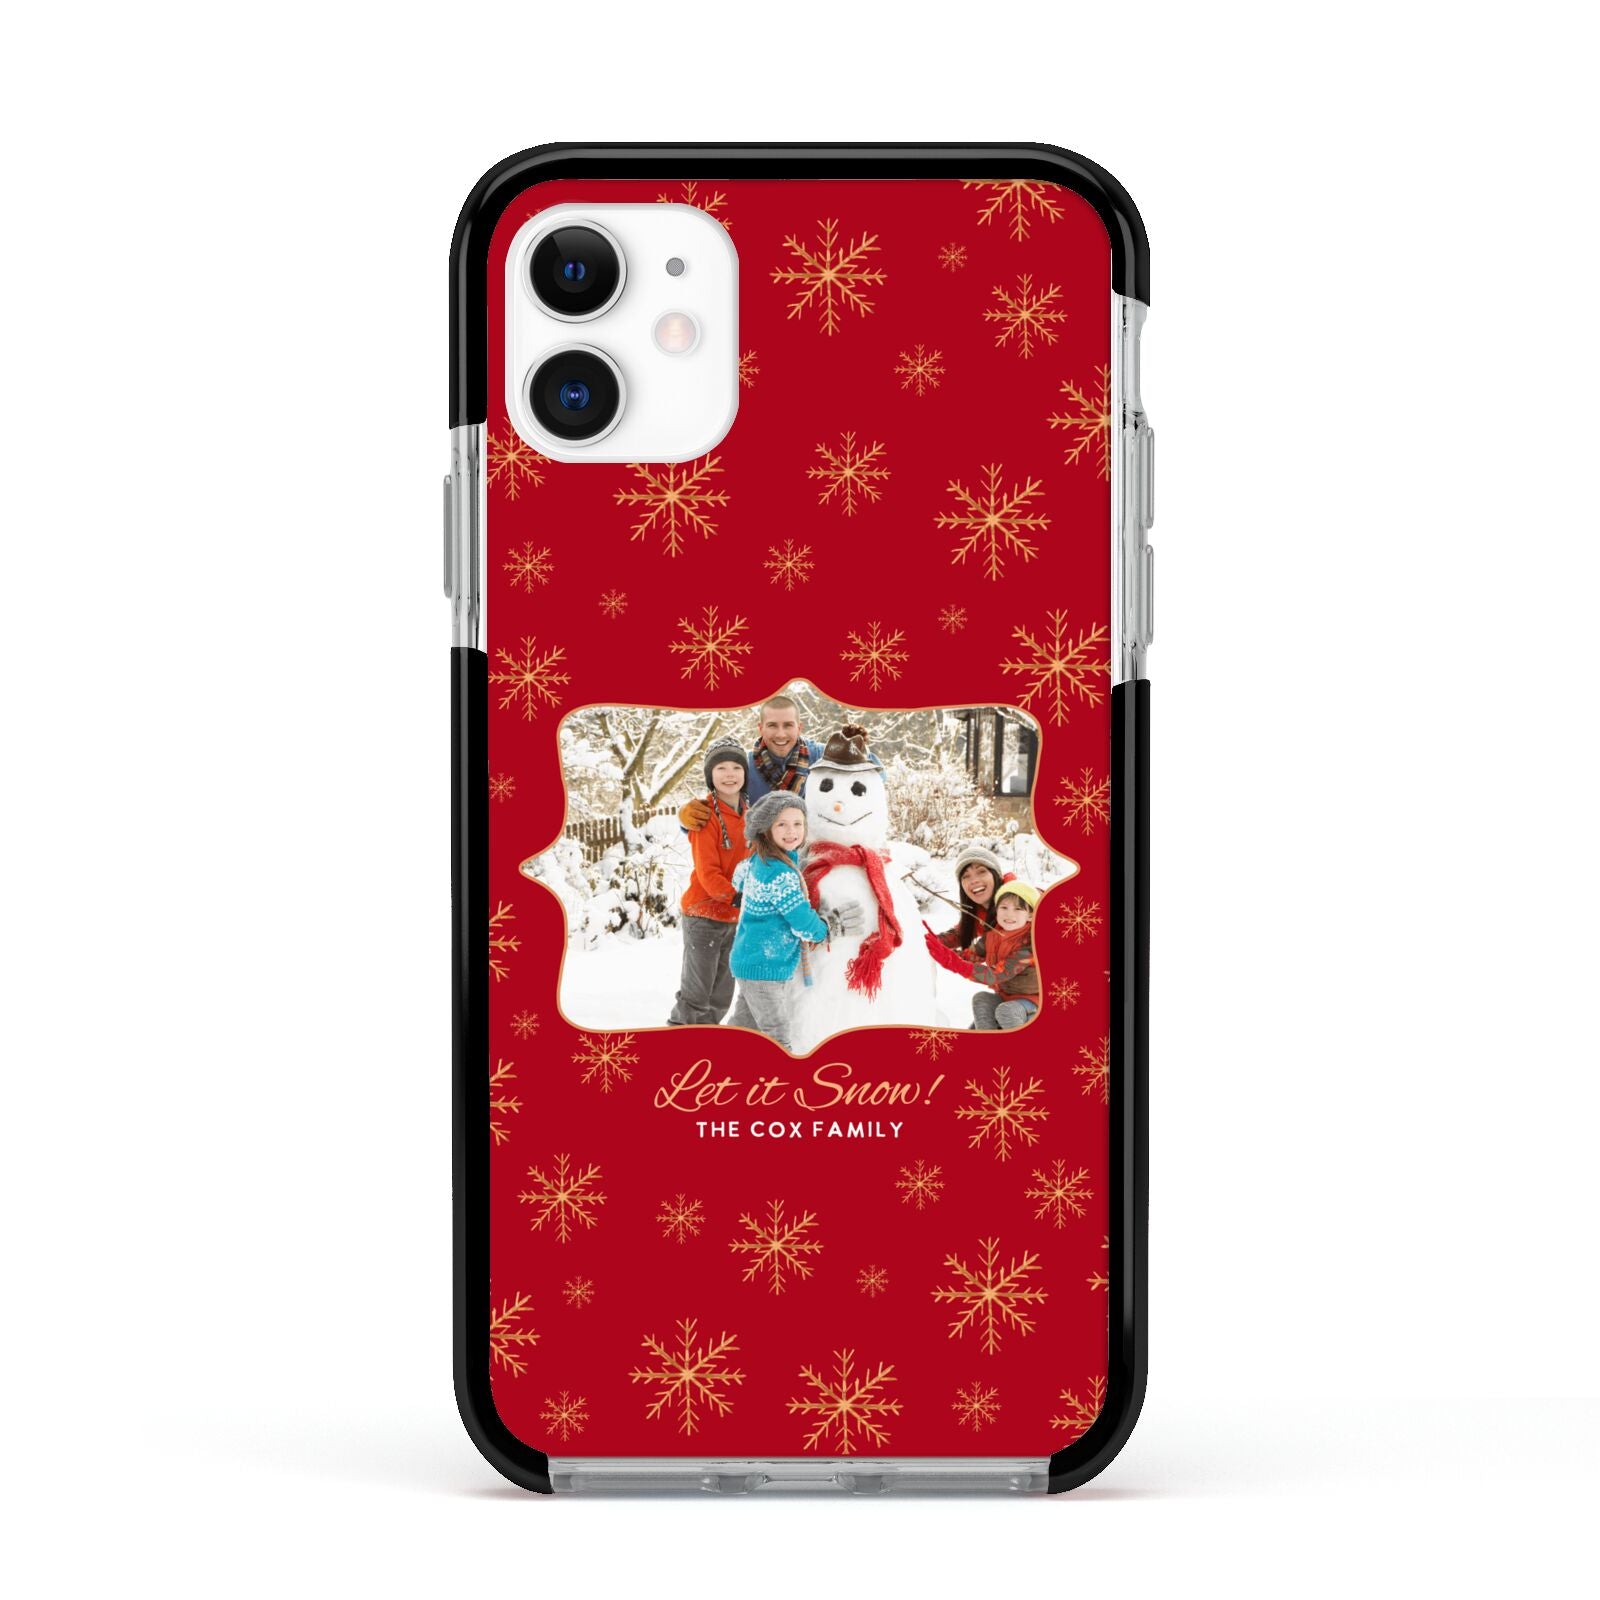 Let it Snow Christmas Photo Upload Apple iPhone 11 in White with Black Impact Case